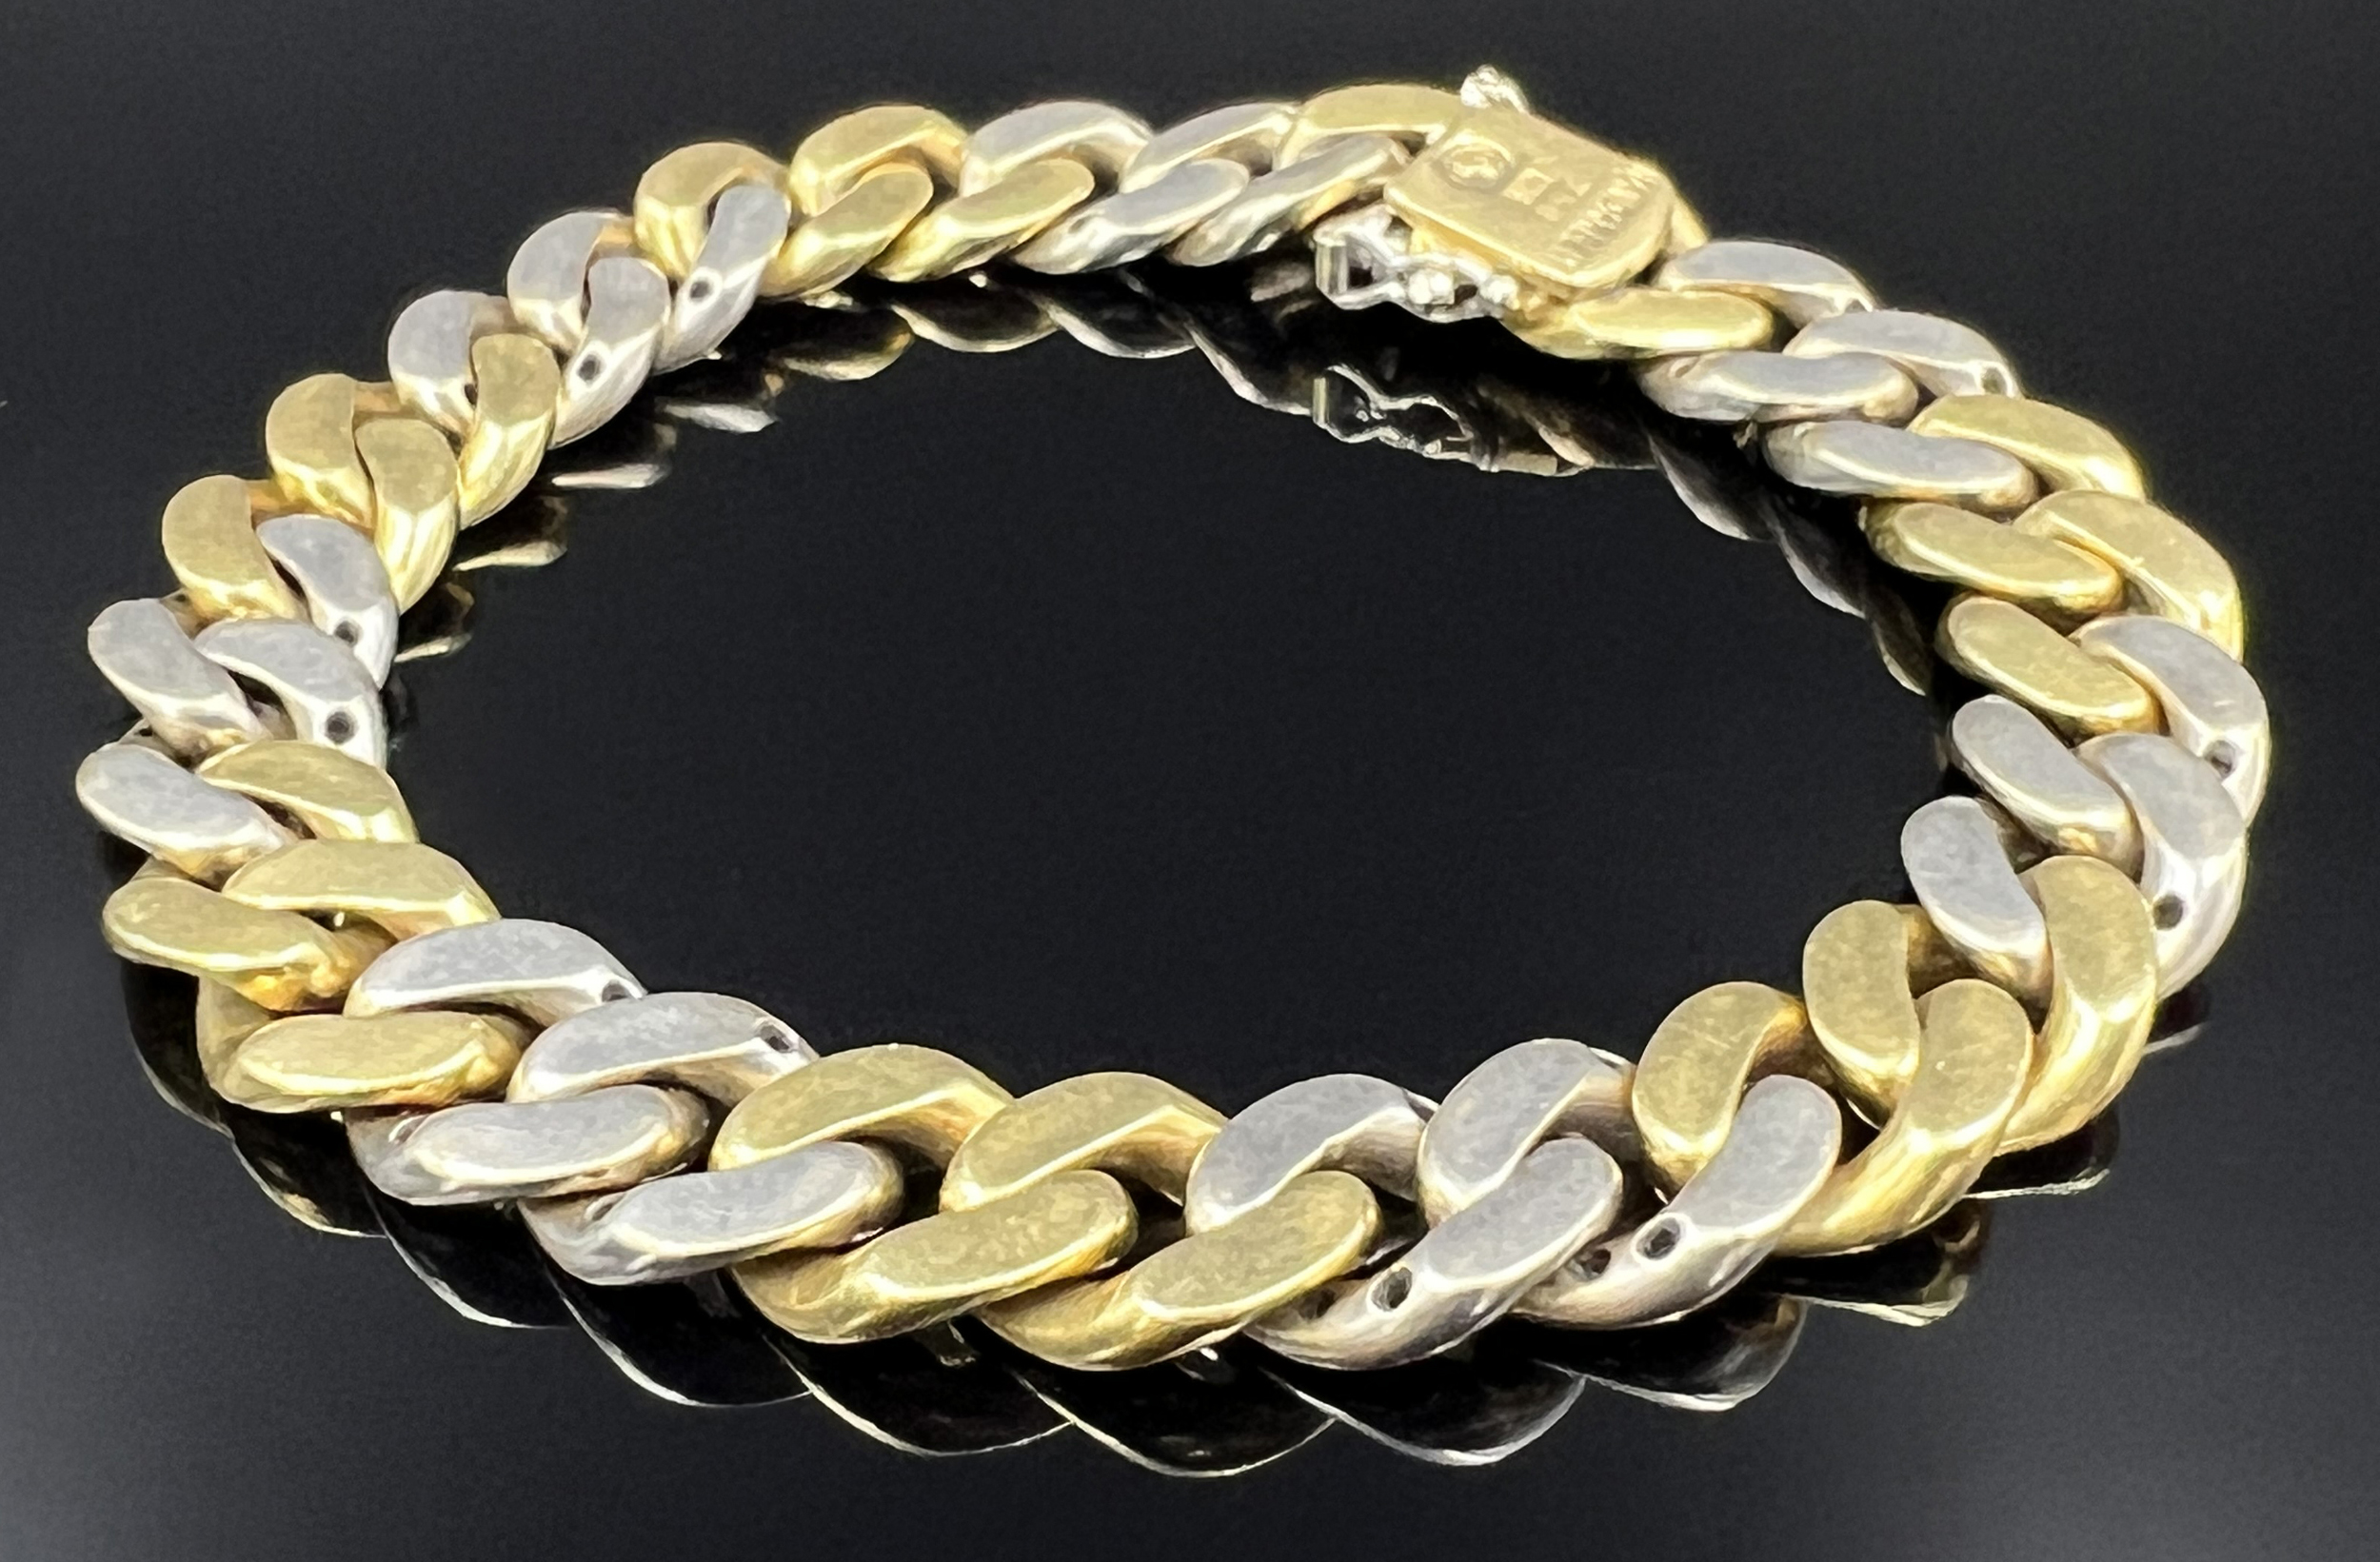 Arm chain / curb chain. 750 yellow gold and white gold with small diamonds. - Image 4 of 6